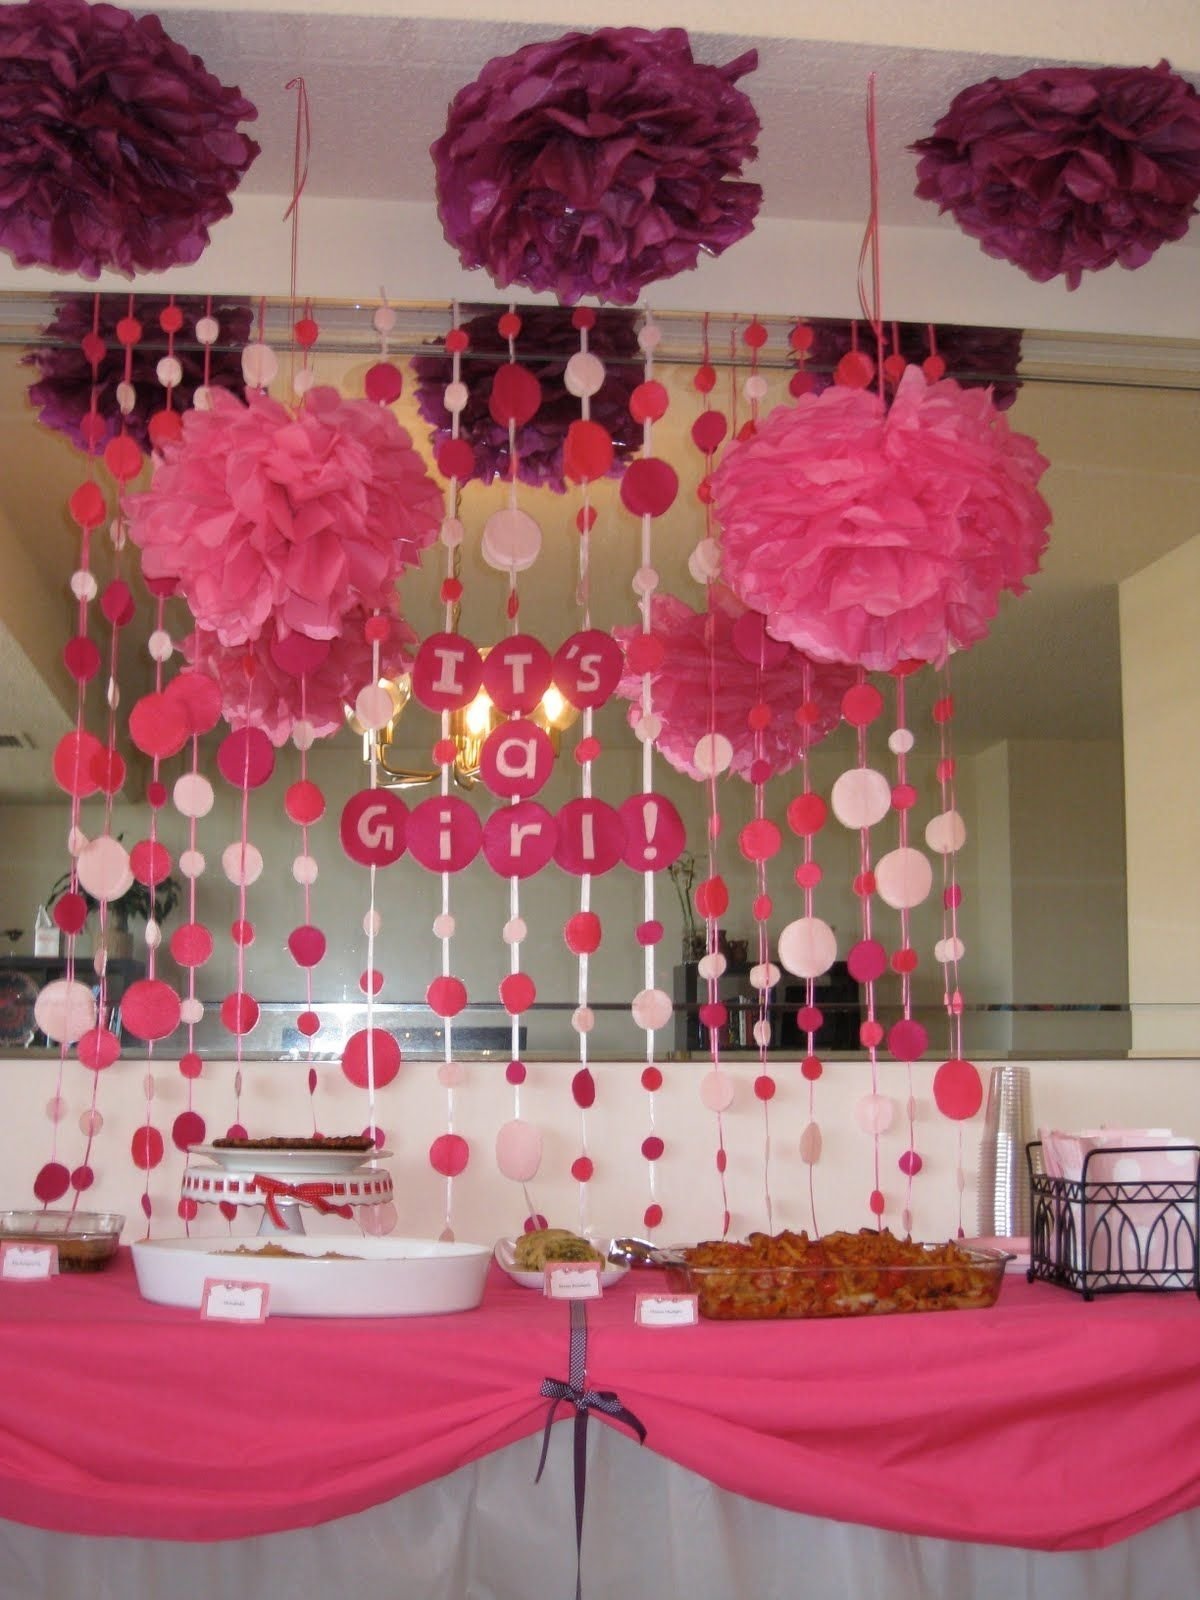 10 Awesome Girl Themed Baby Shower Ideas baby shower centerpiece ideas baby girl shower ideas wedding 3 2022